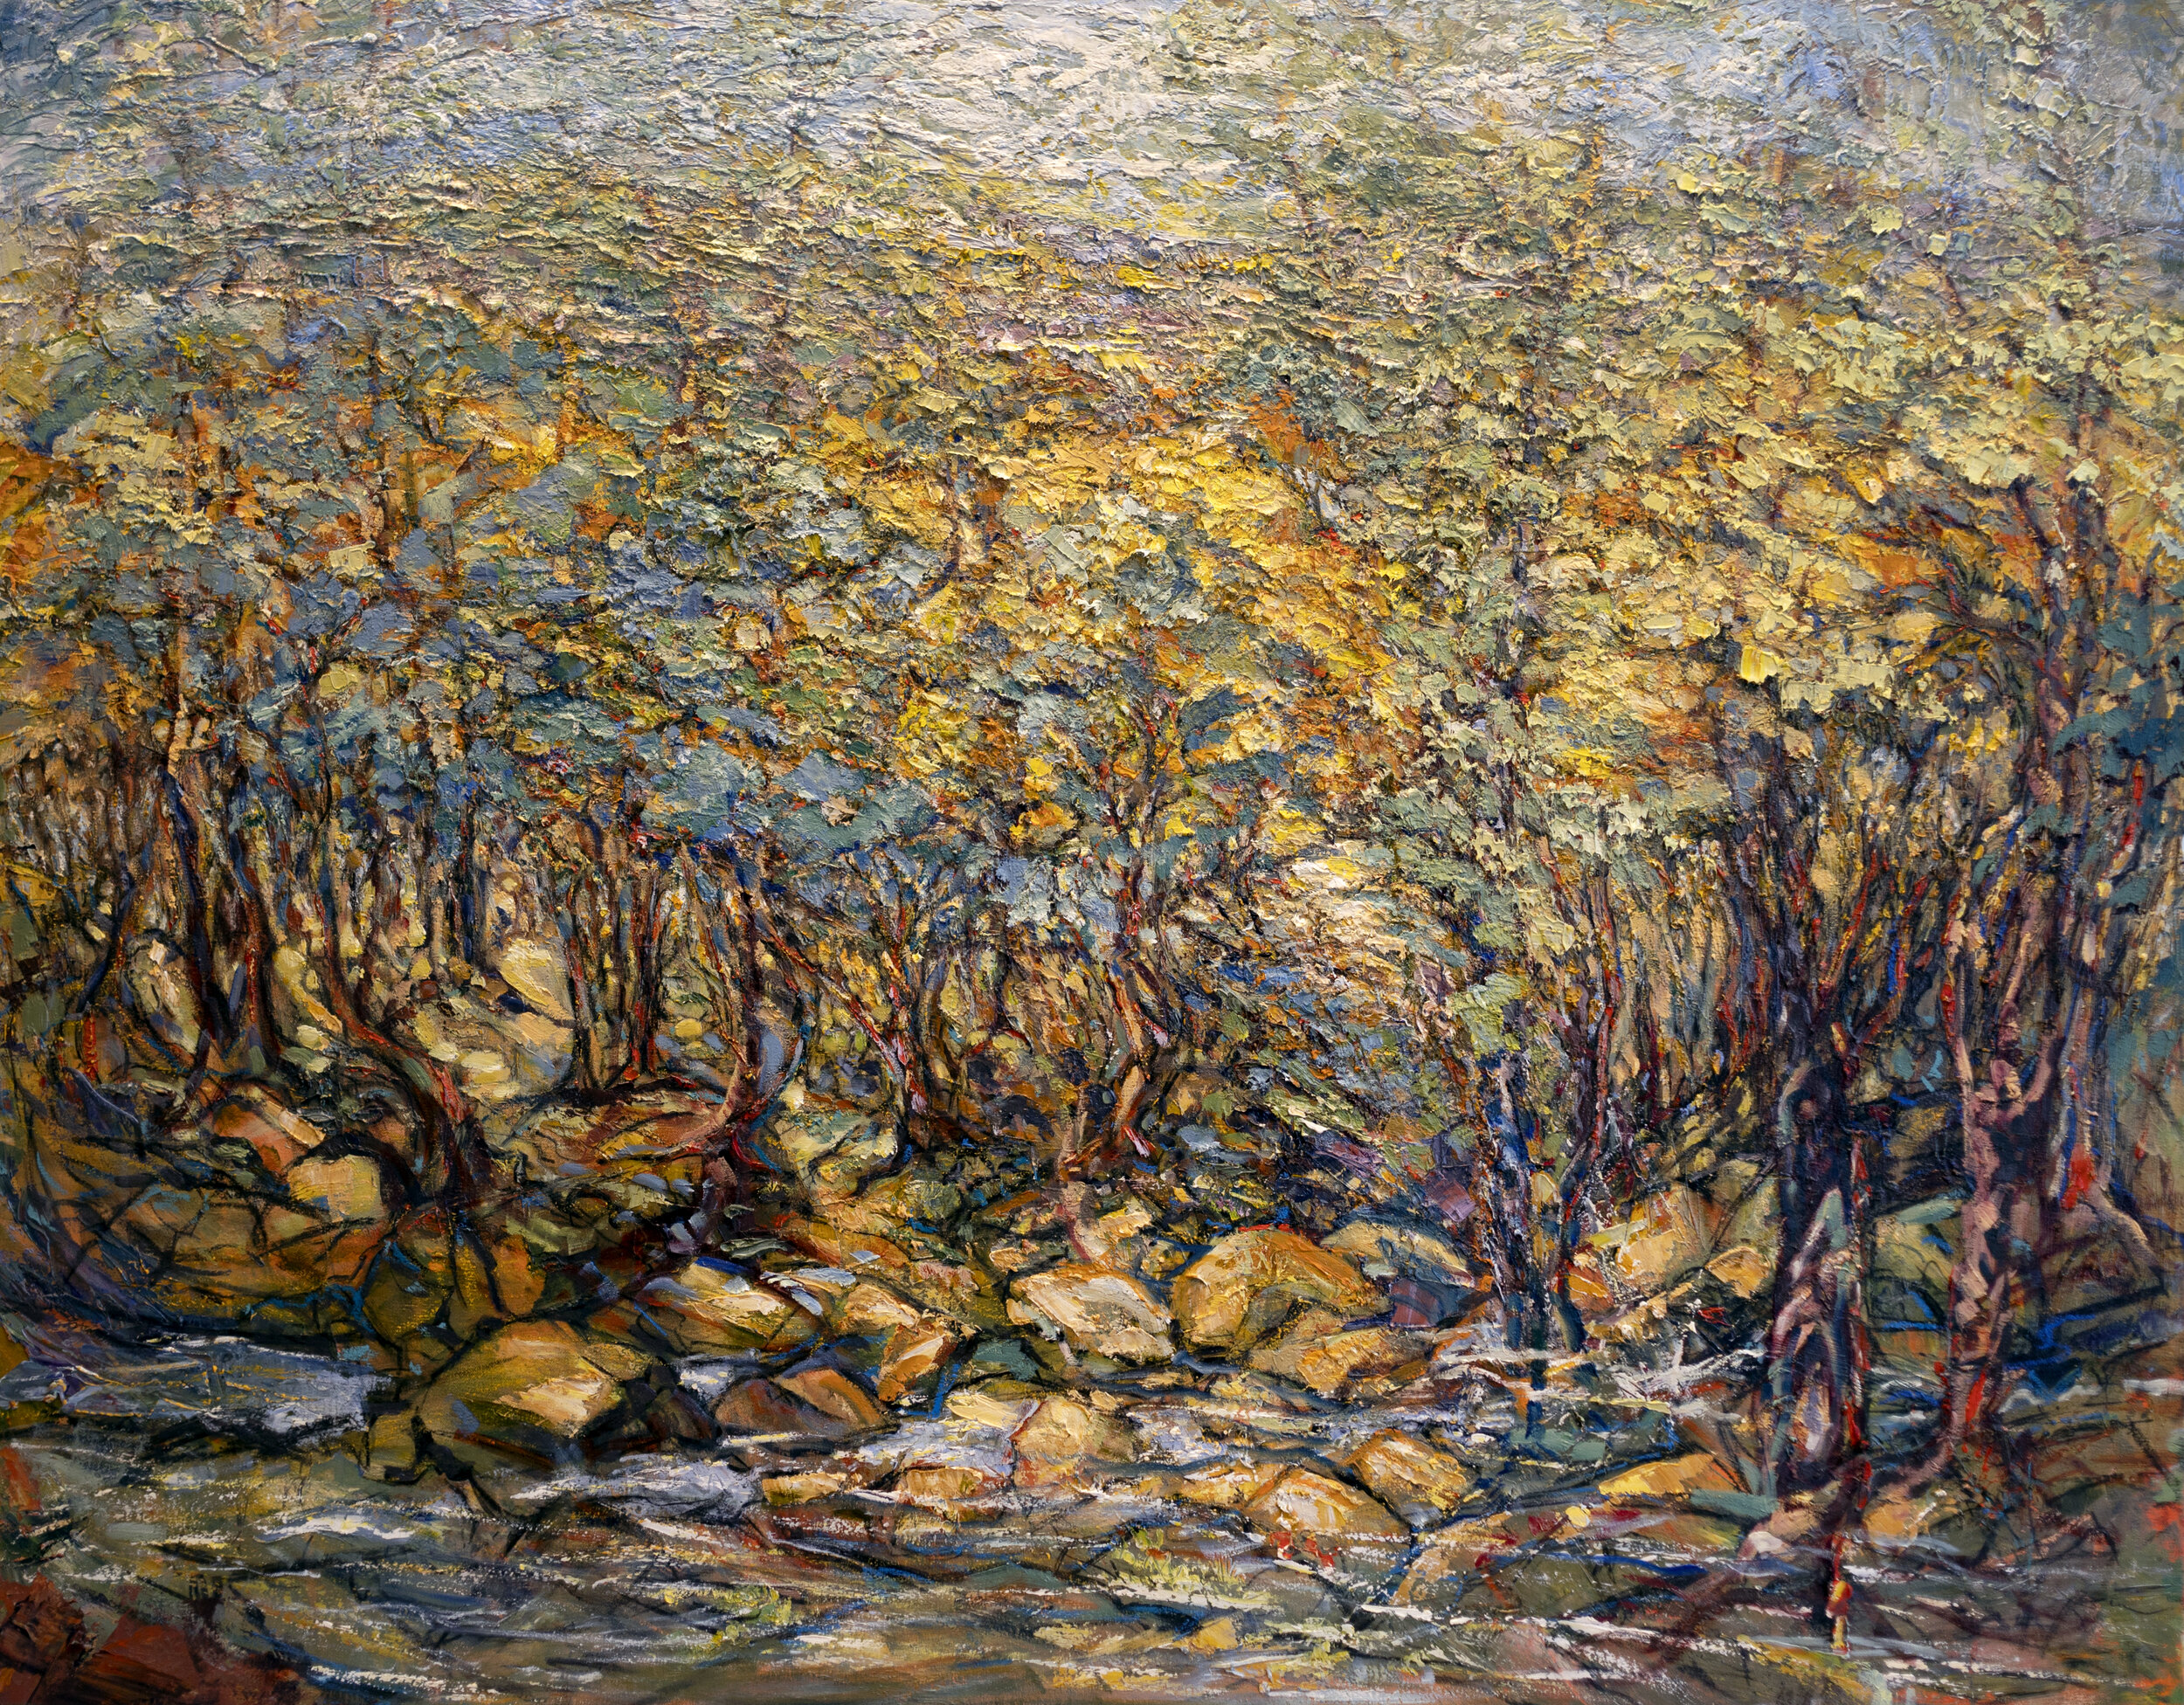   SOLD    Trees, Rocks,and Water   Oil on canvas  48” x60”  Private collection 